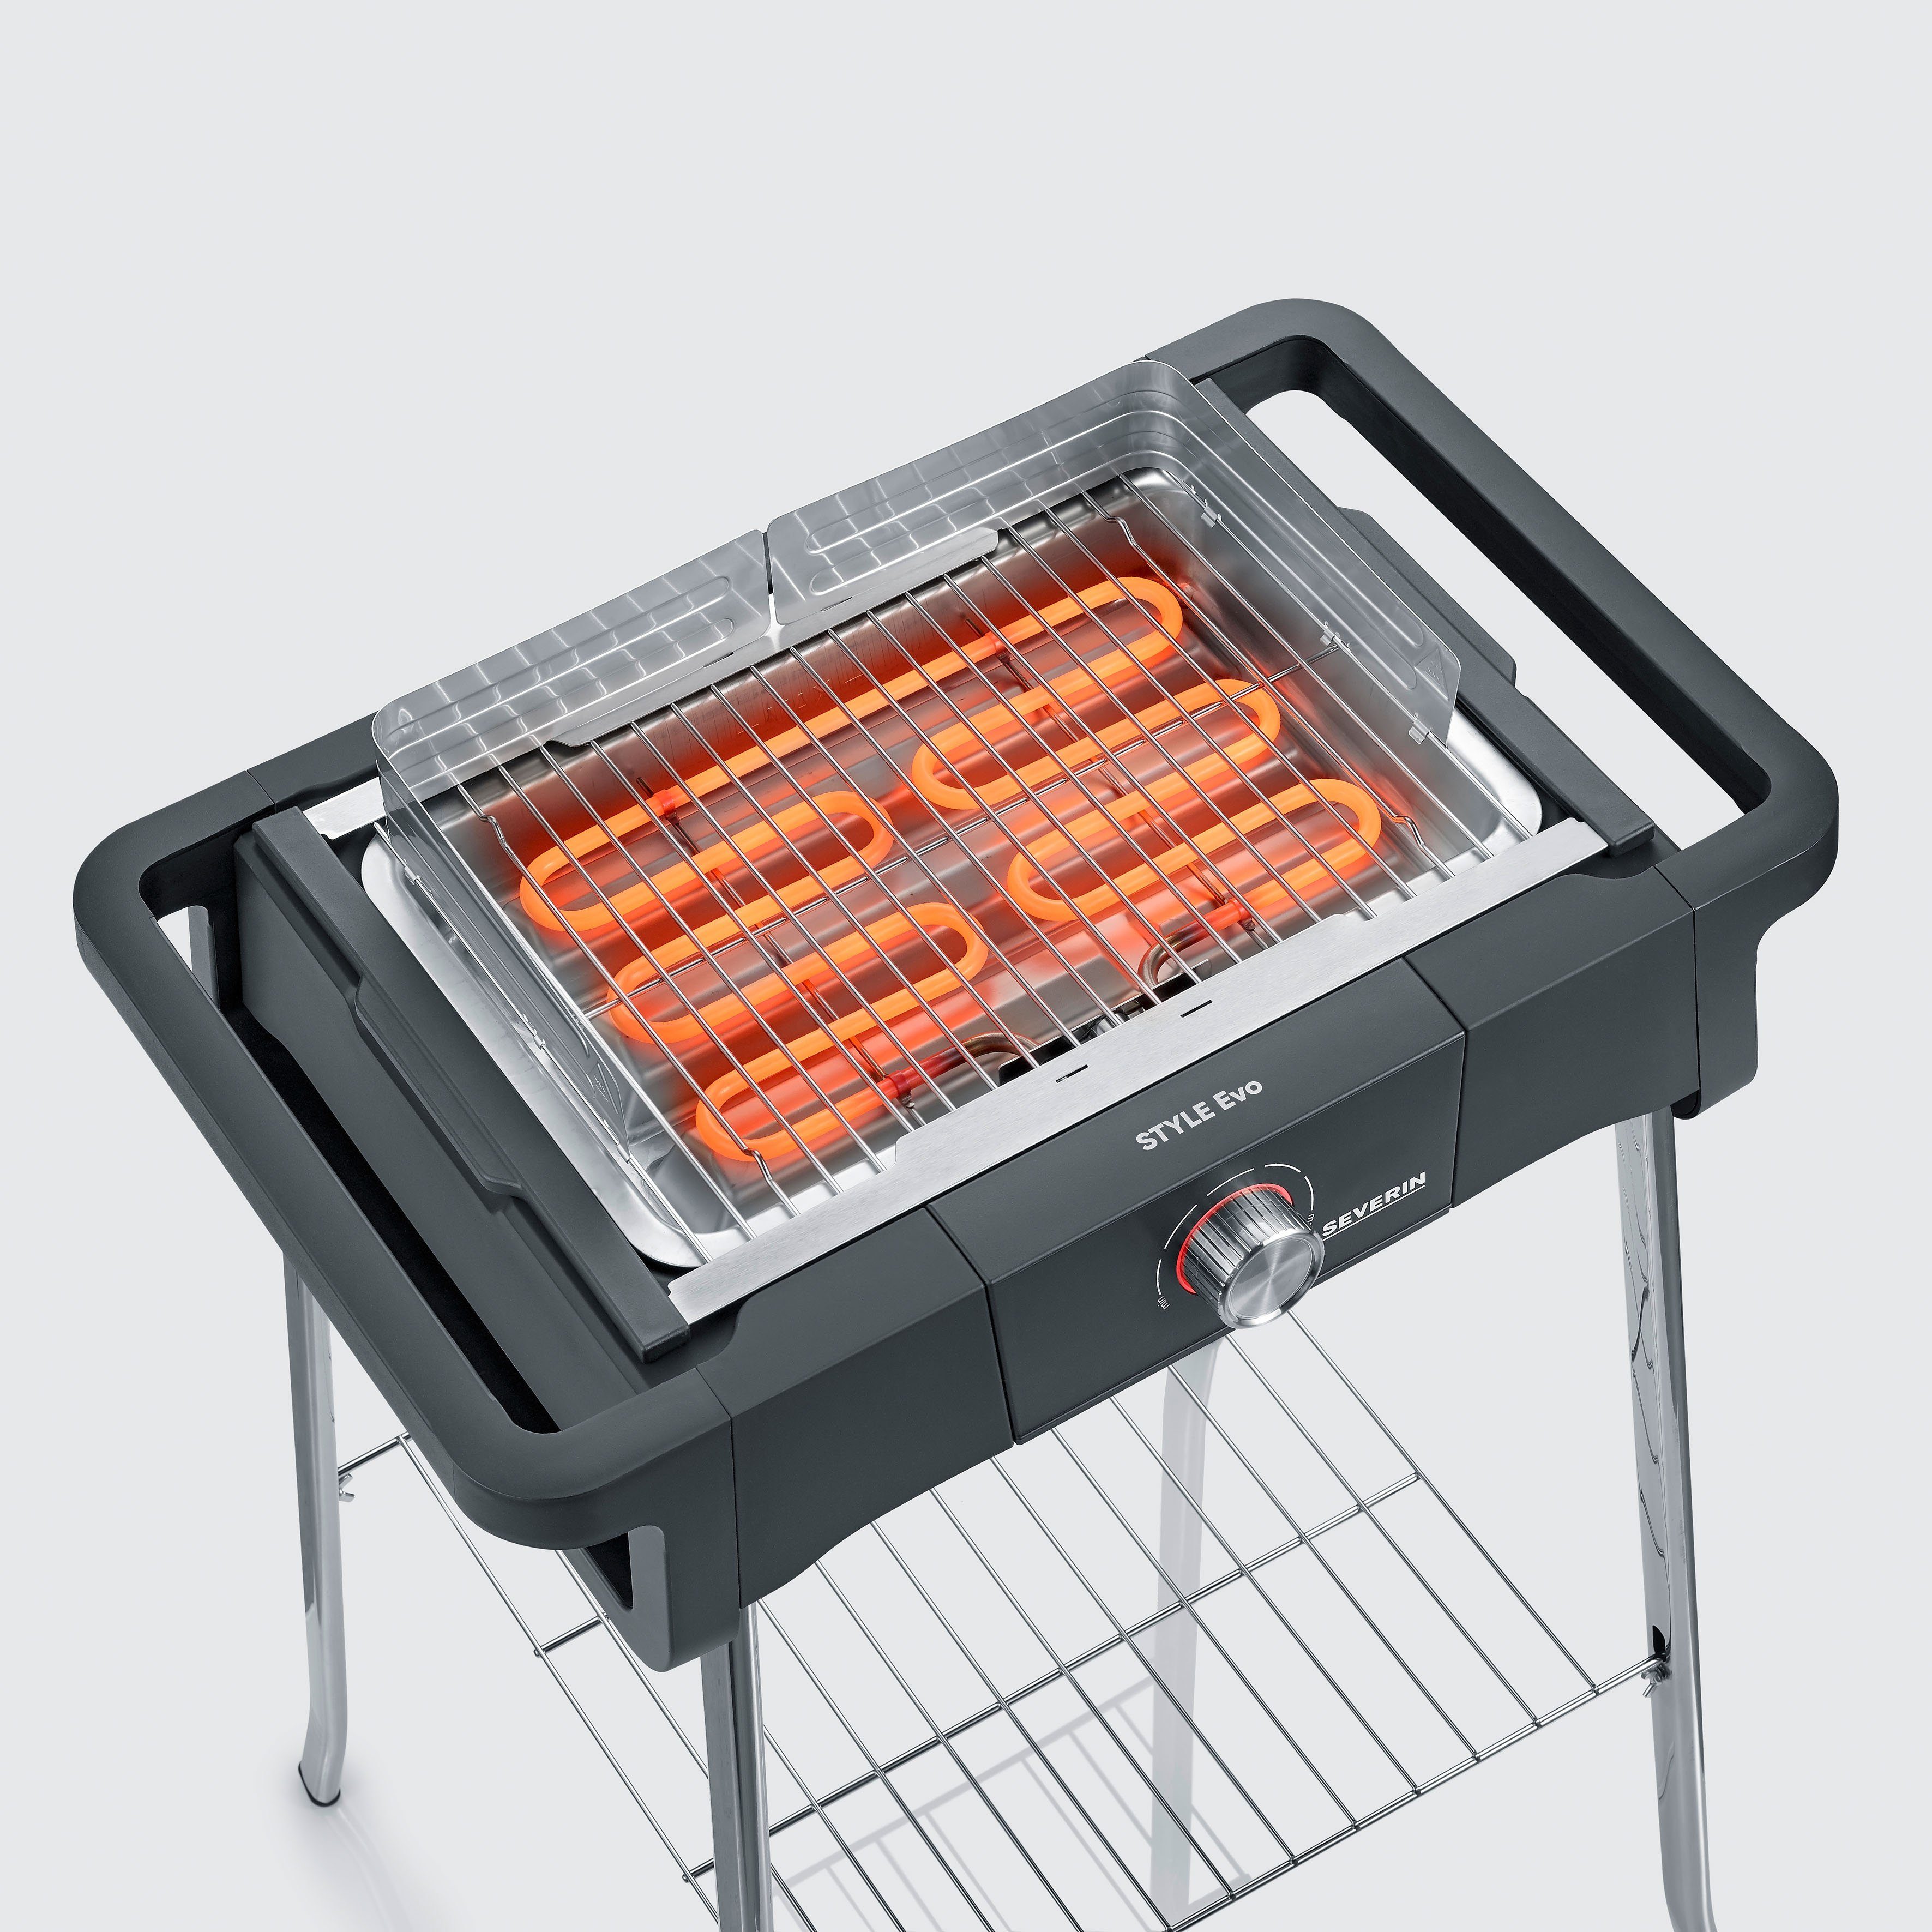 Severin Standgrill PG 8124 STYLE 2500 S, EVO W